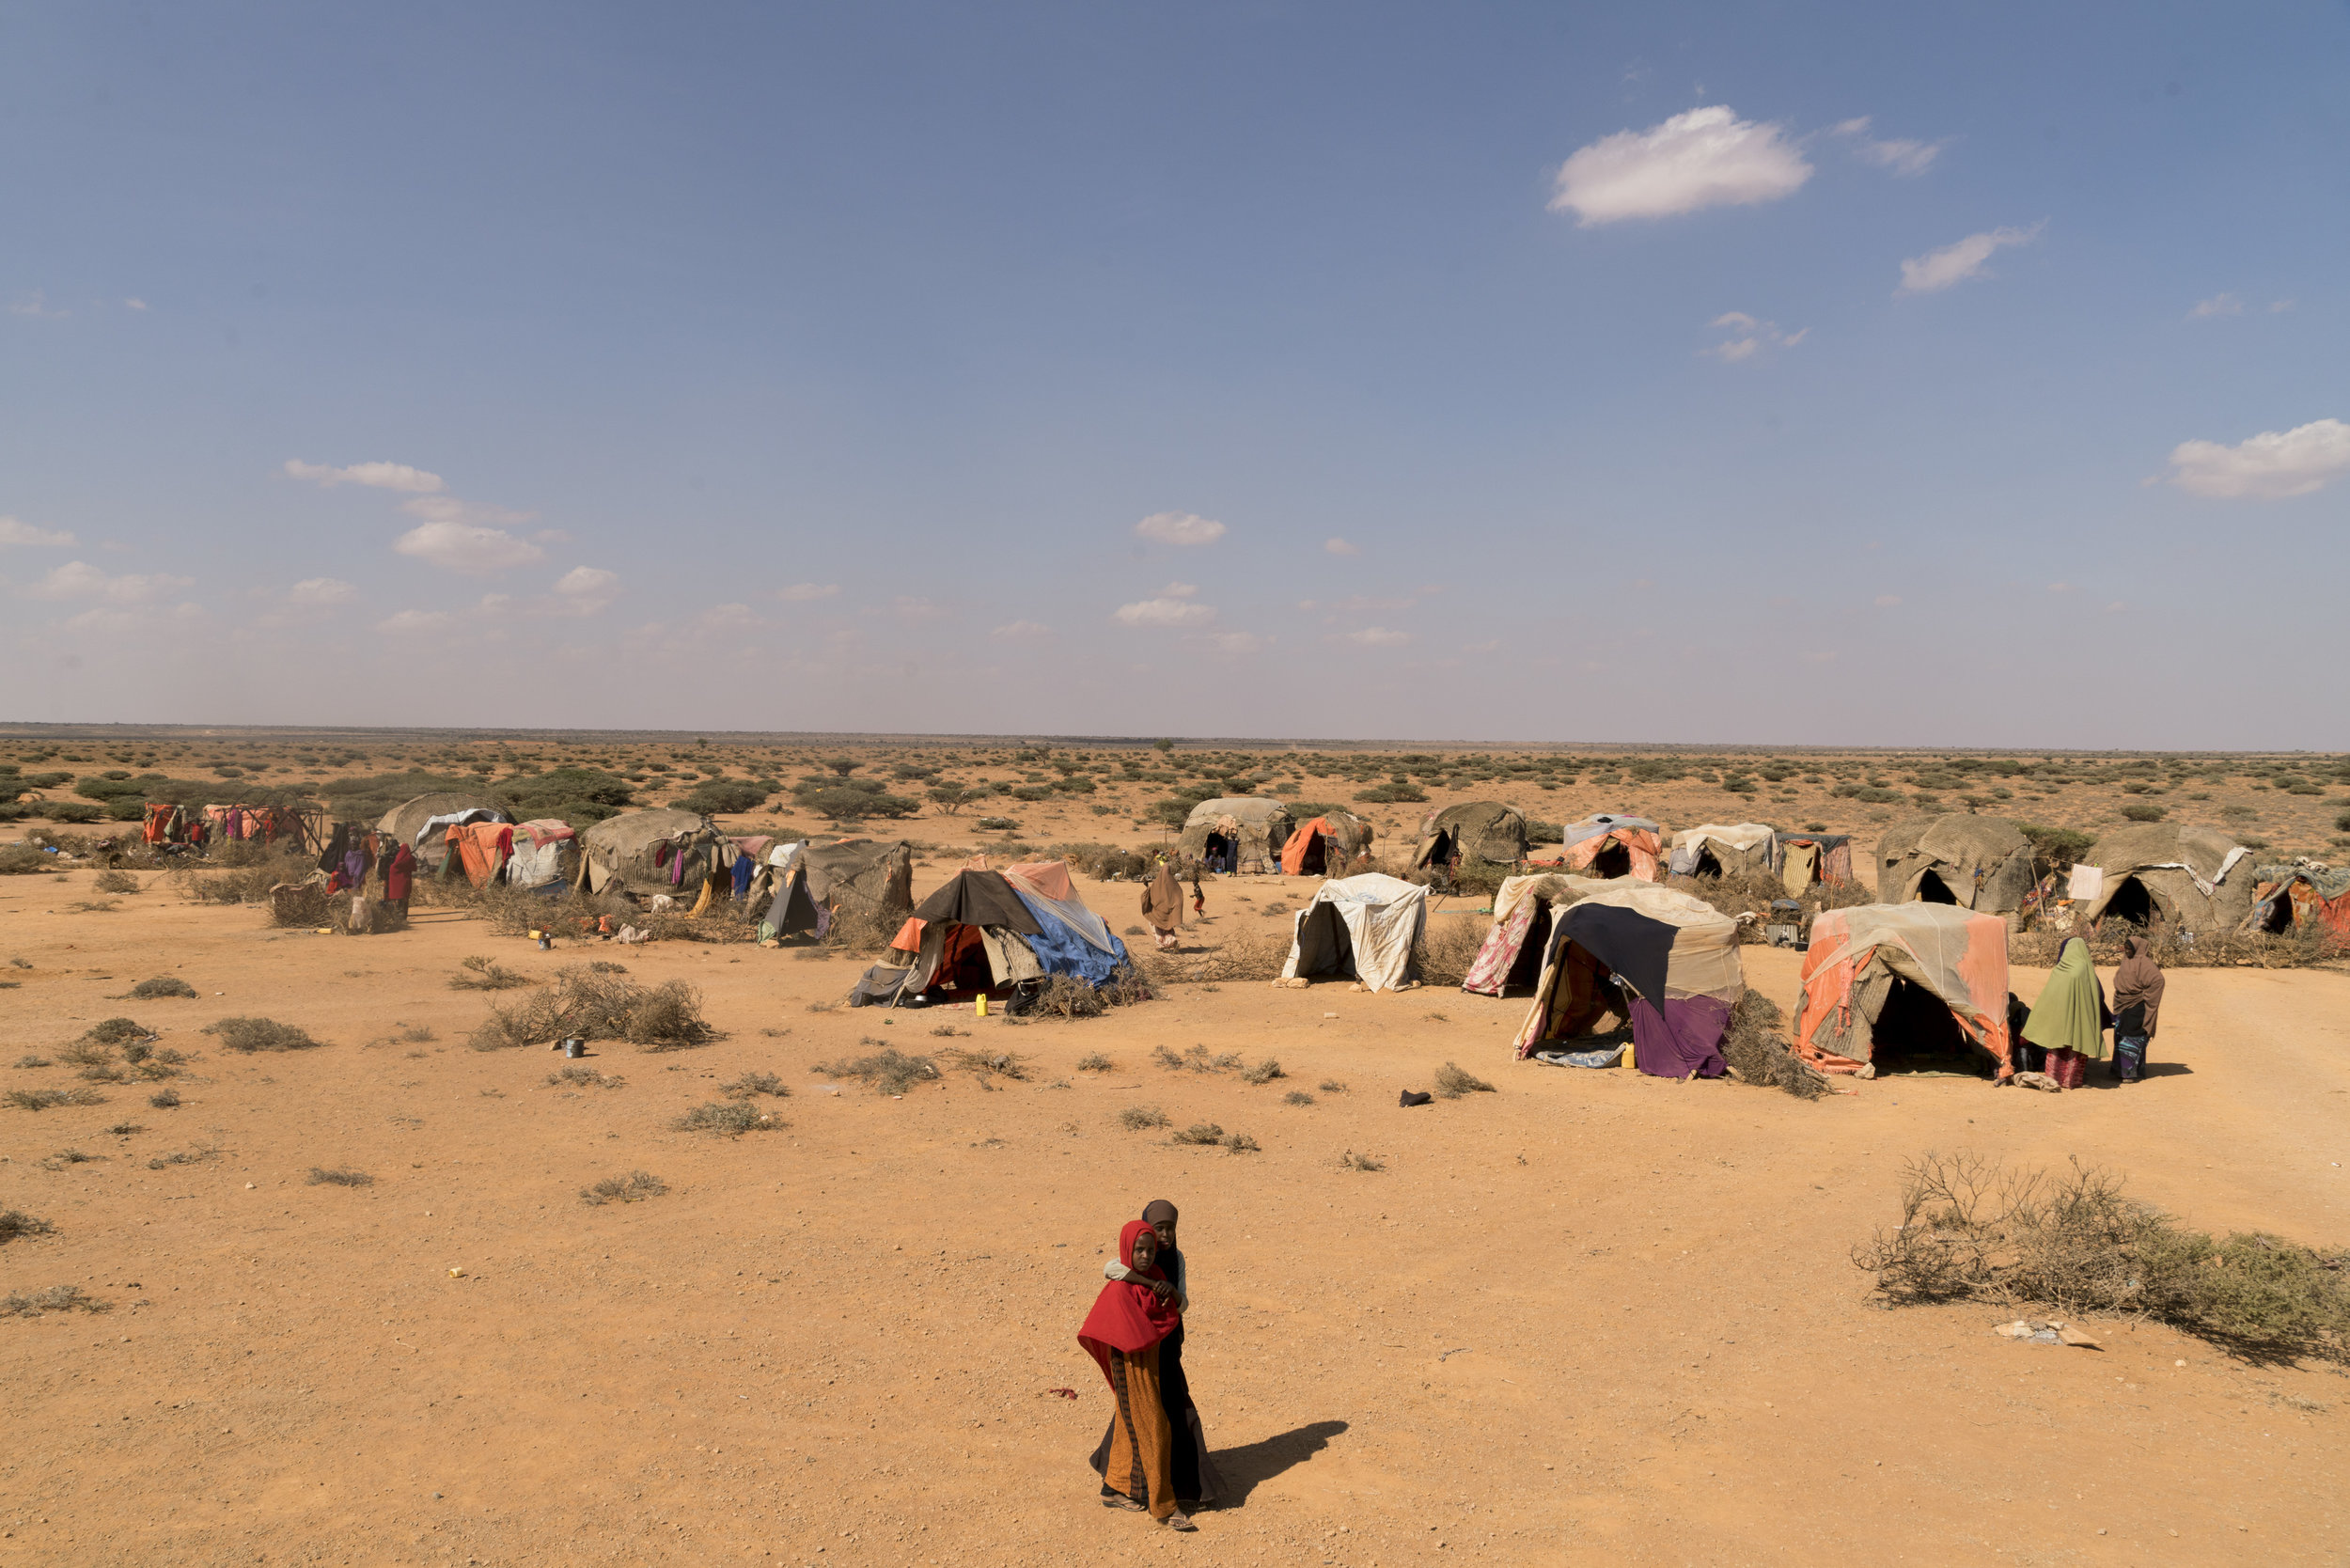  The shelters of nearly 400 pastoralists families who have lost a majority of their livestock due to drought, have set up camp along the road in search of food and water in Uusgure, Puntland, northern Somalia, February 18, 2017. 